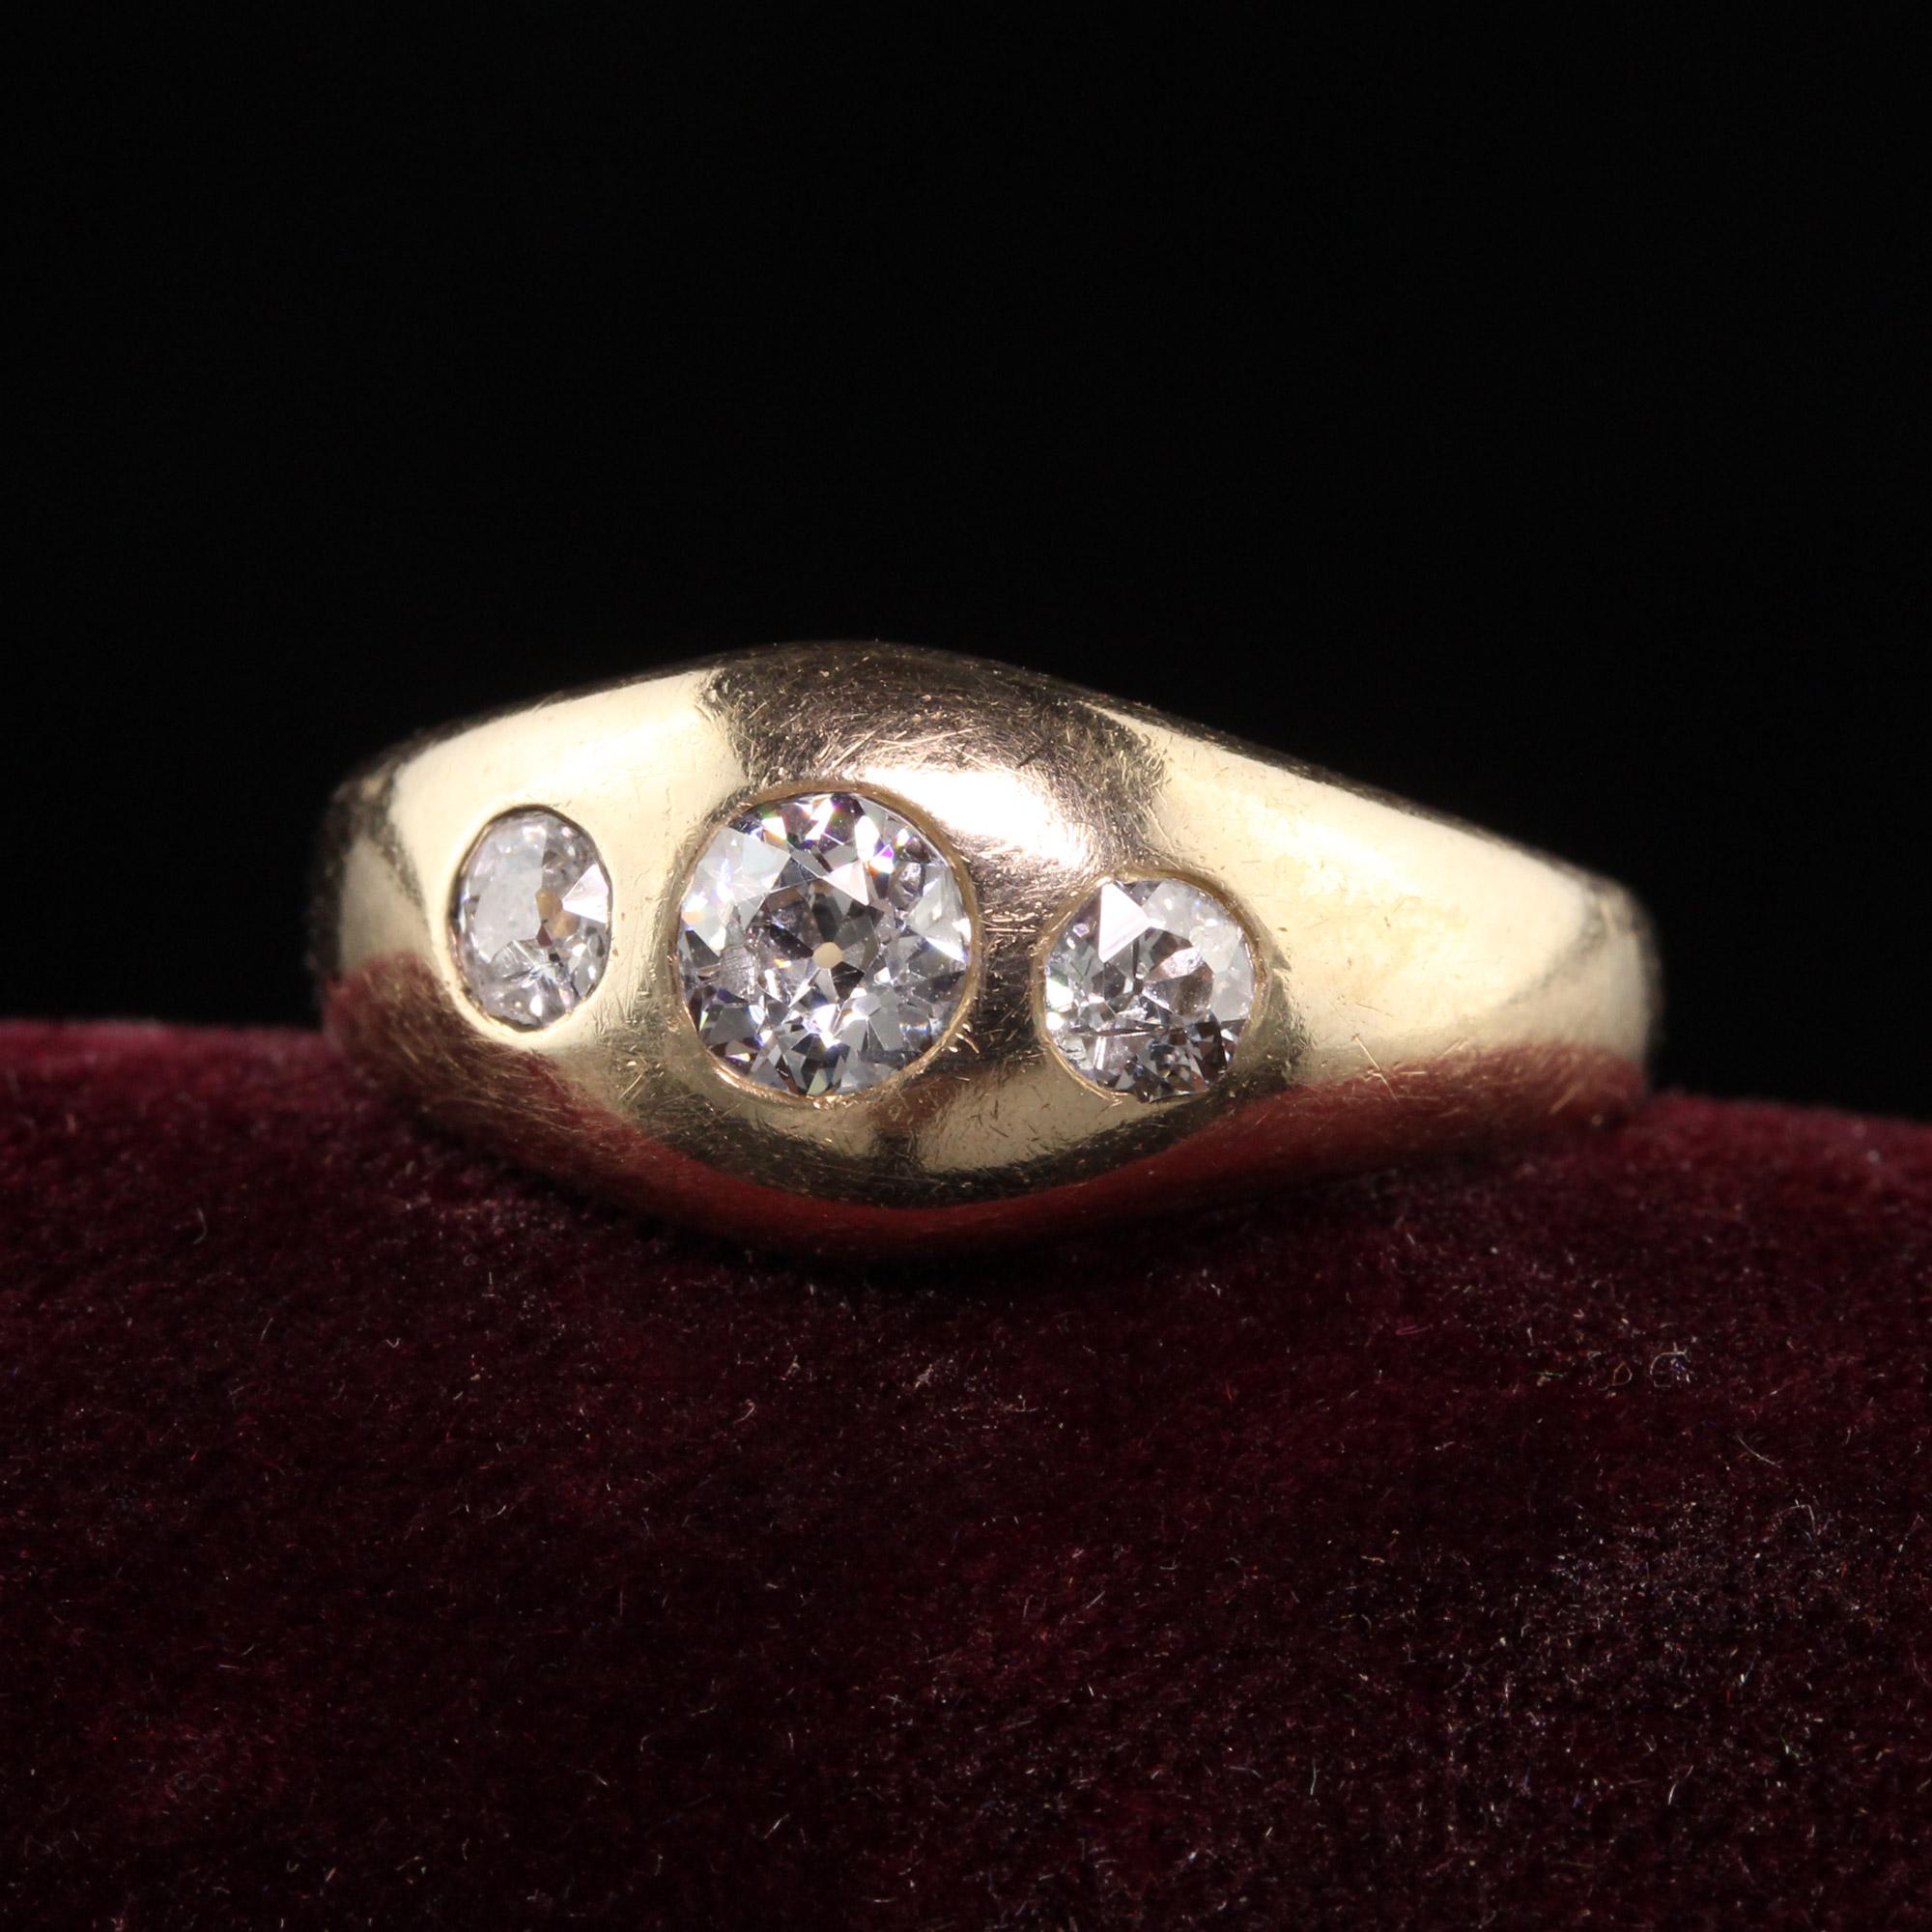 Beautiful Antique Victorian 14K Yellow Gold Old Mine Cut Diamond Three Stone Gypsy Ring. This beautiful ring is crafted in 14K yellow gold and has three old mine cut diamonds on the top that is bezel set. This ring is commonly called a gypsy ring